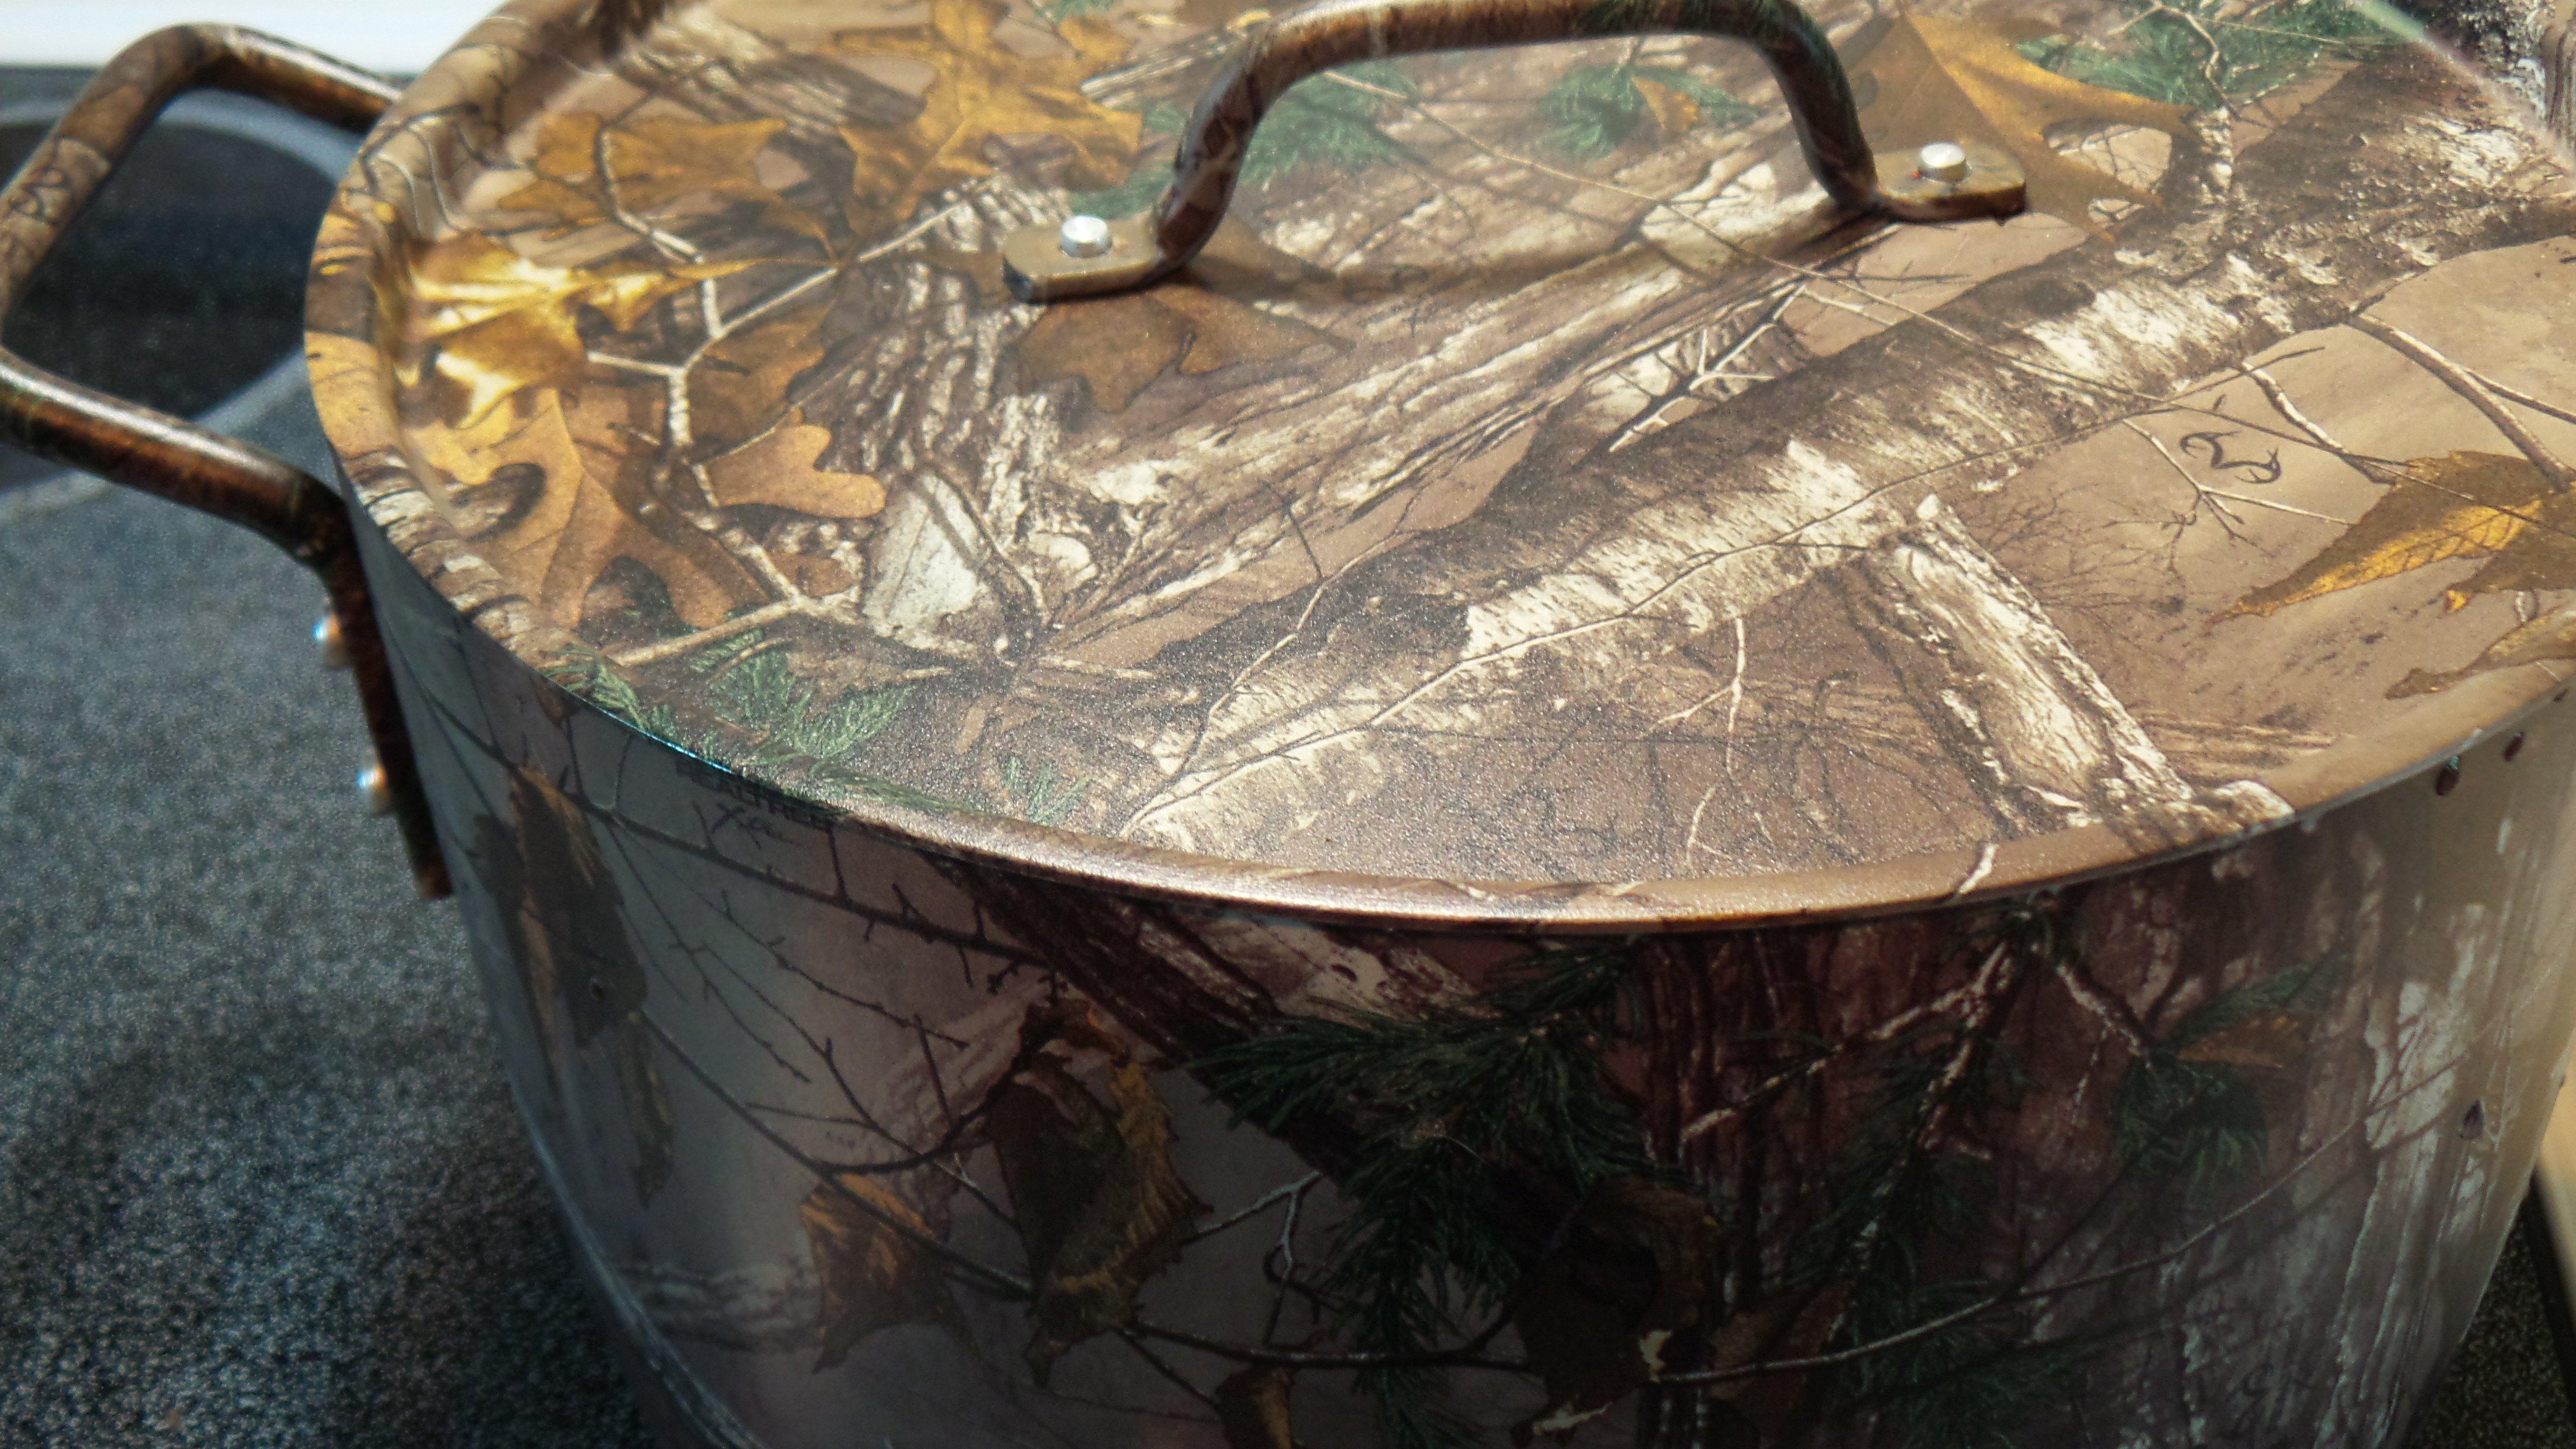 Realtree cookware from Camalo Cookware.